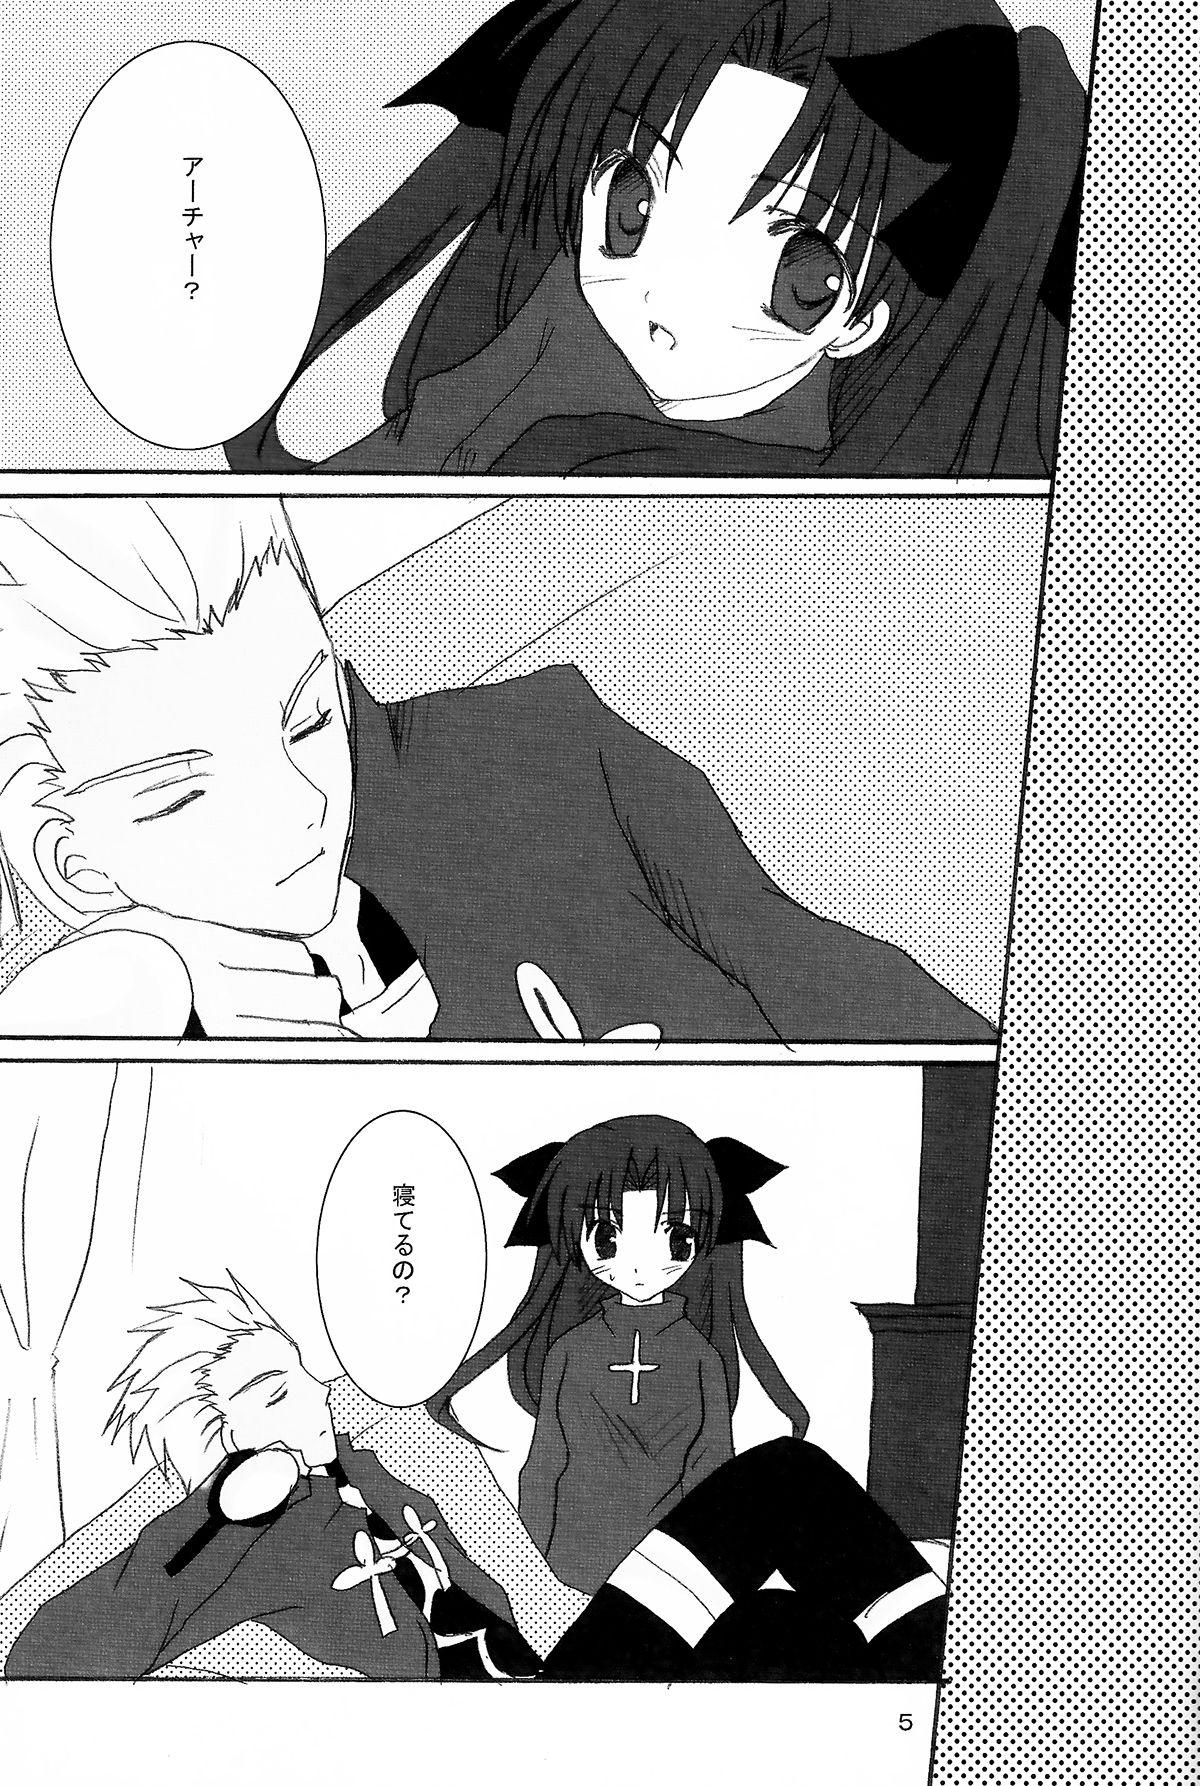 Submission Infinite Emotion - Fate stay night Alone - Page 3